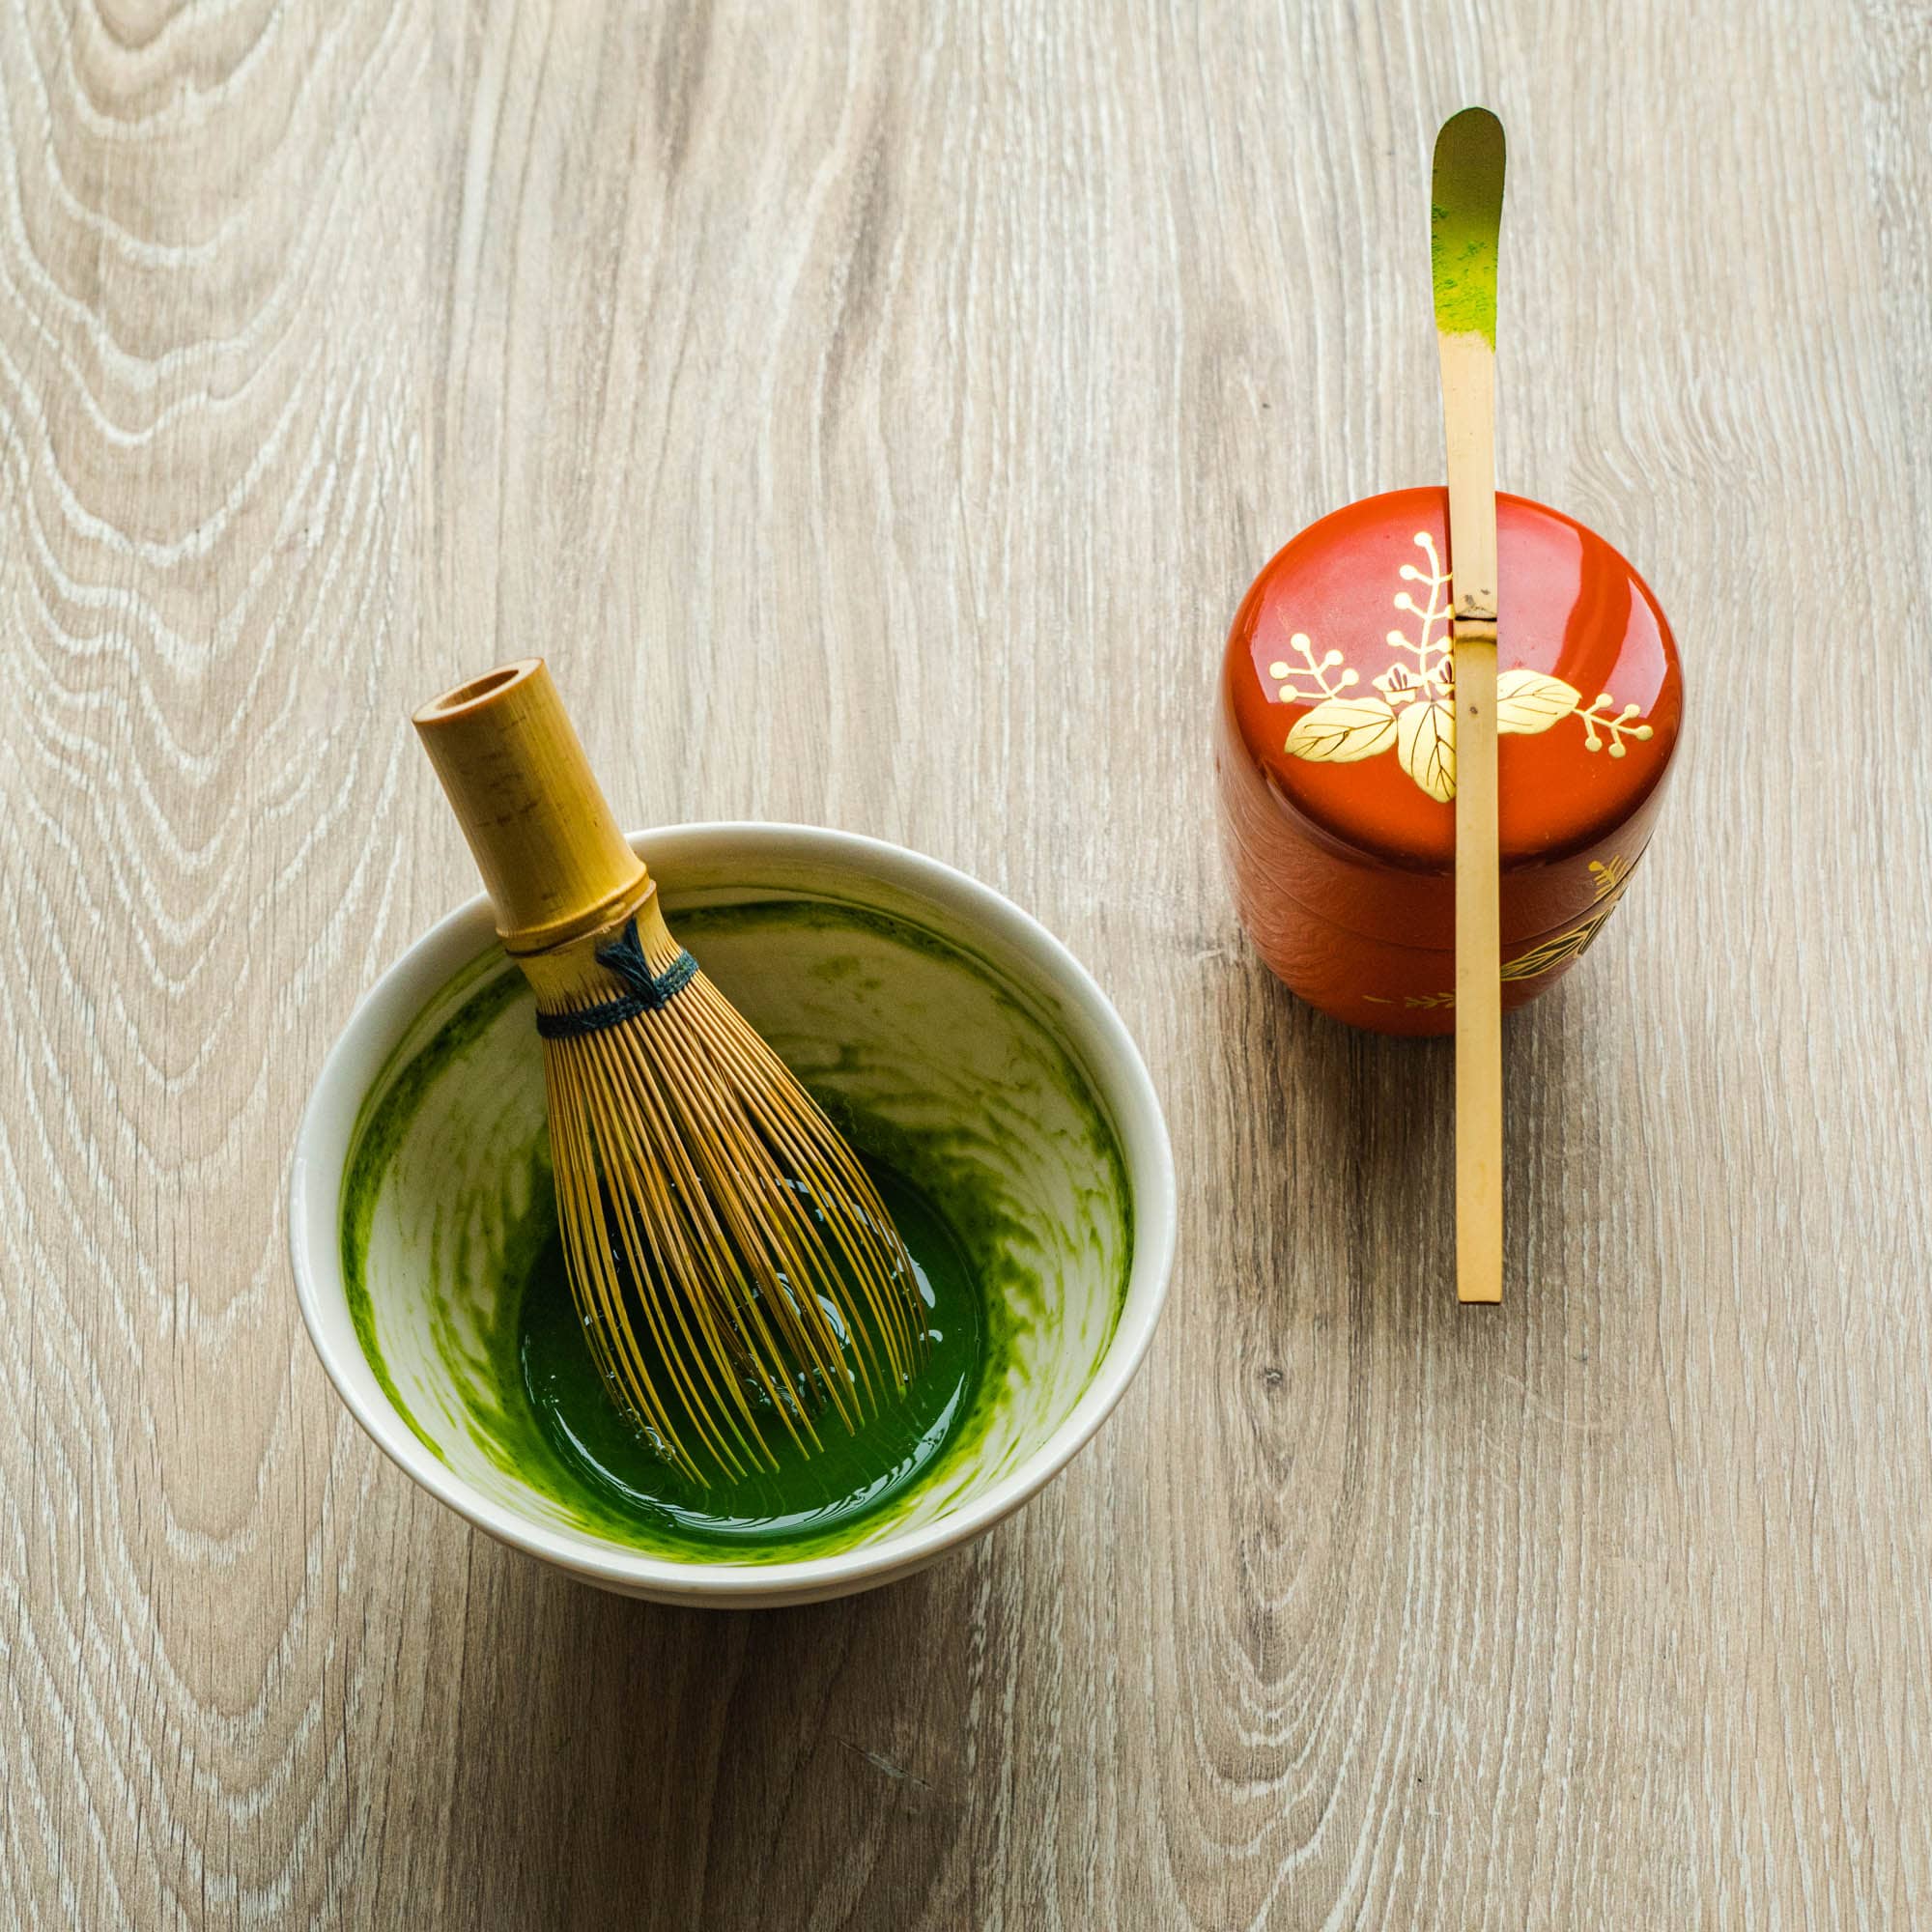 How to Whisk a Bowl of Matcha Green Tea